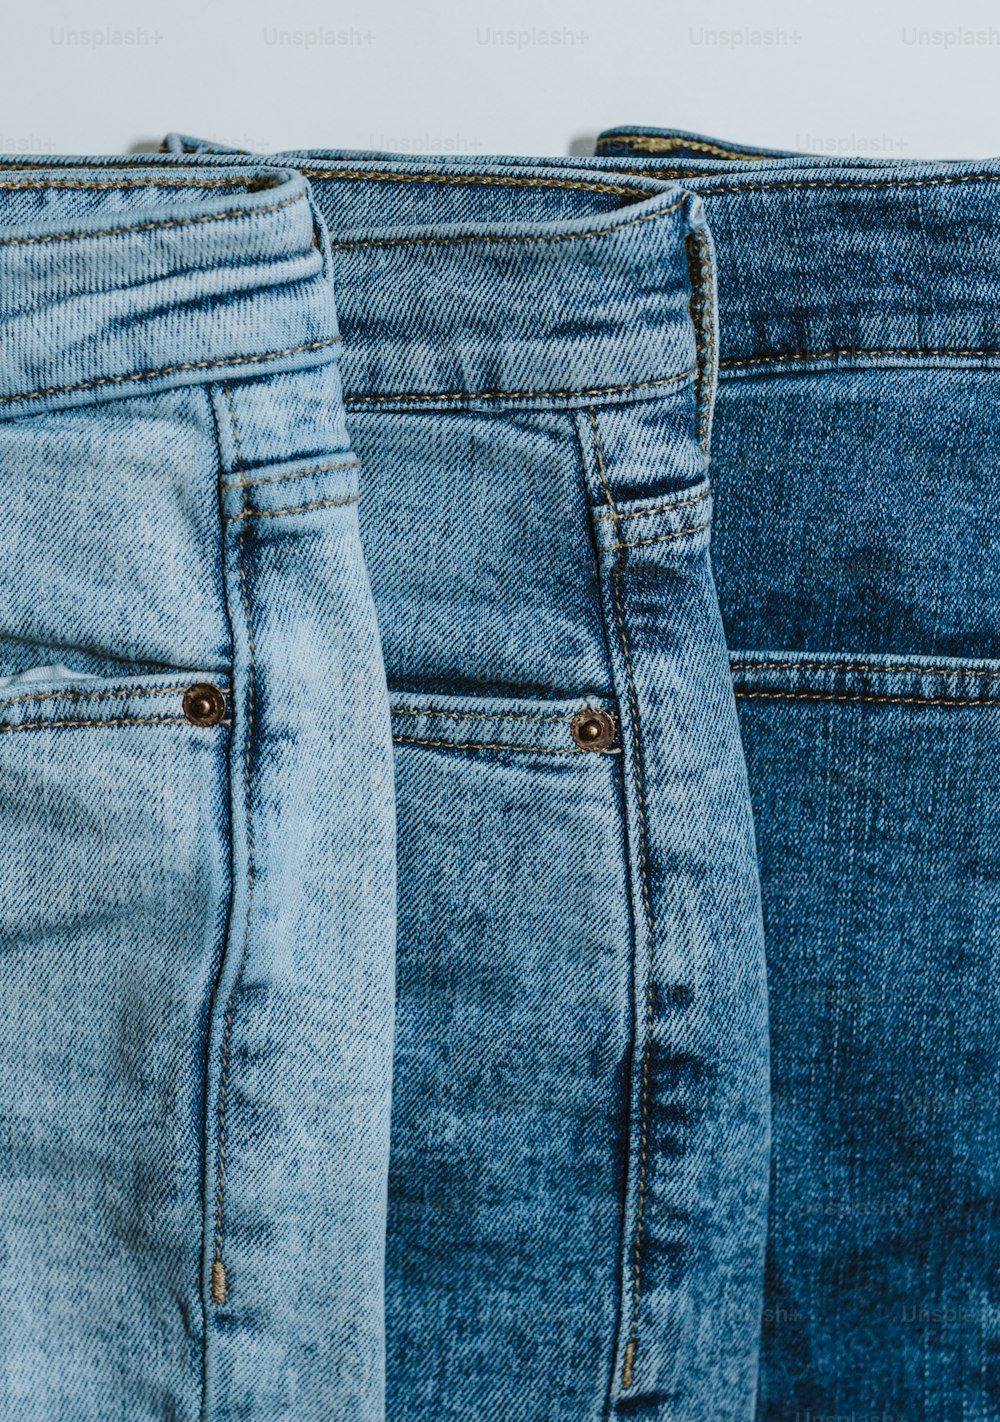 three pairs of jeans are lined up in a row